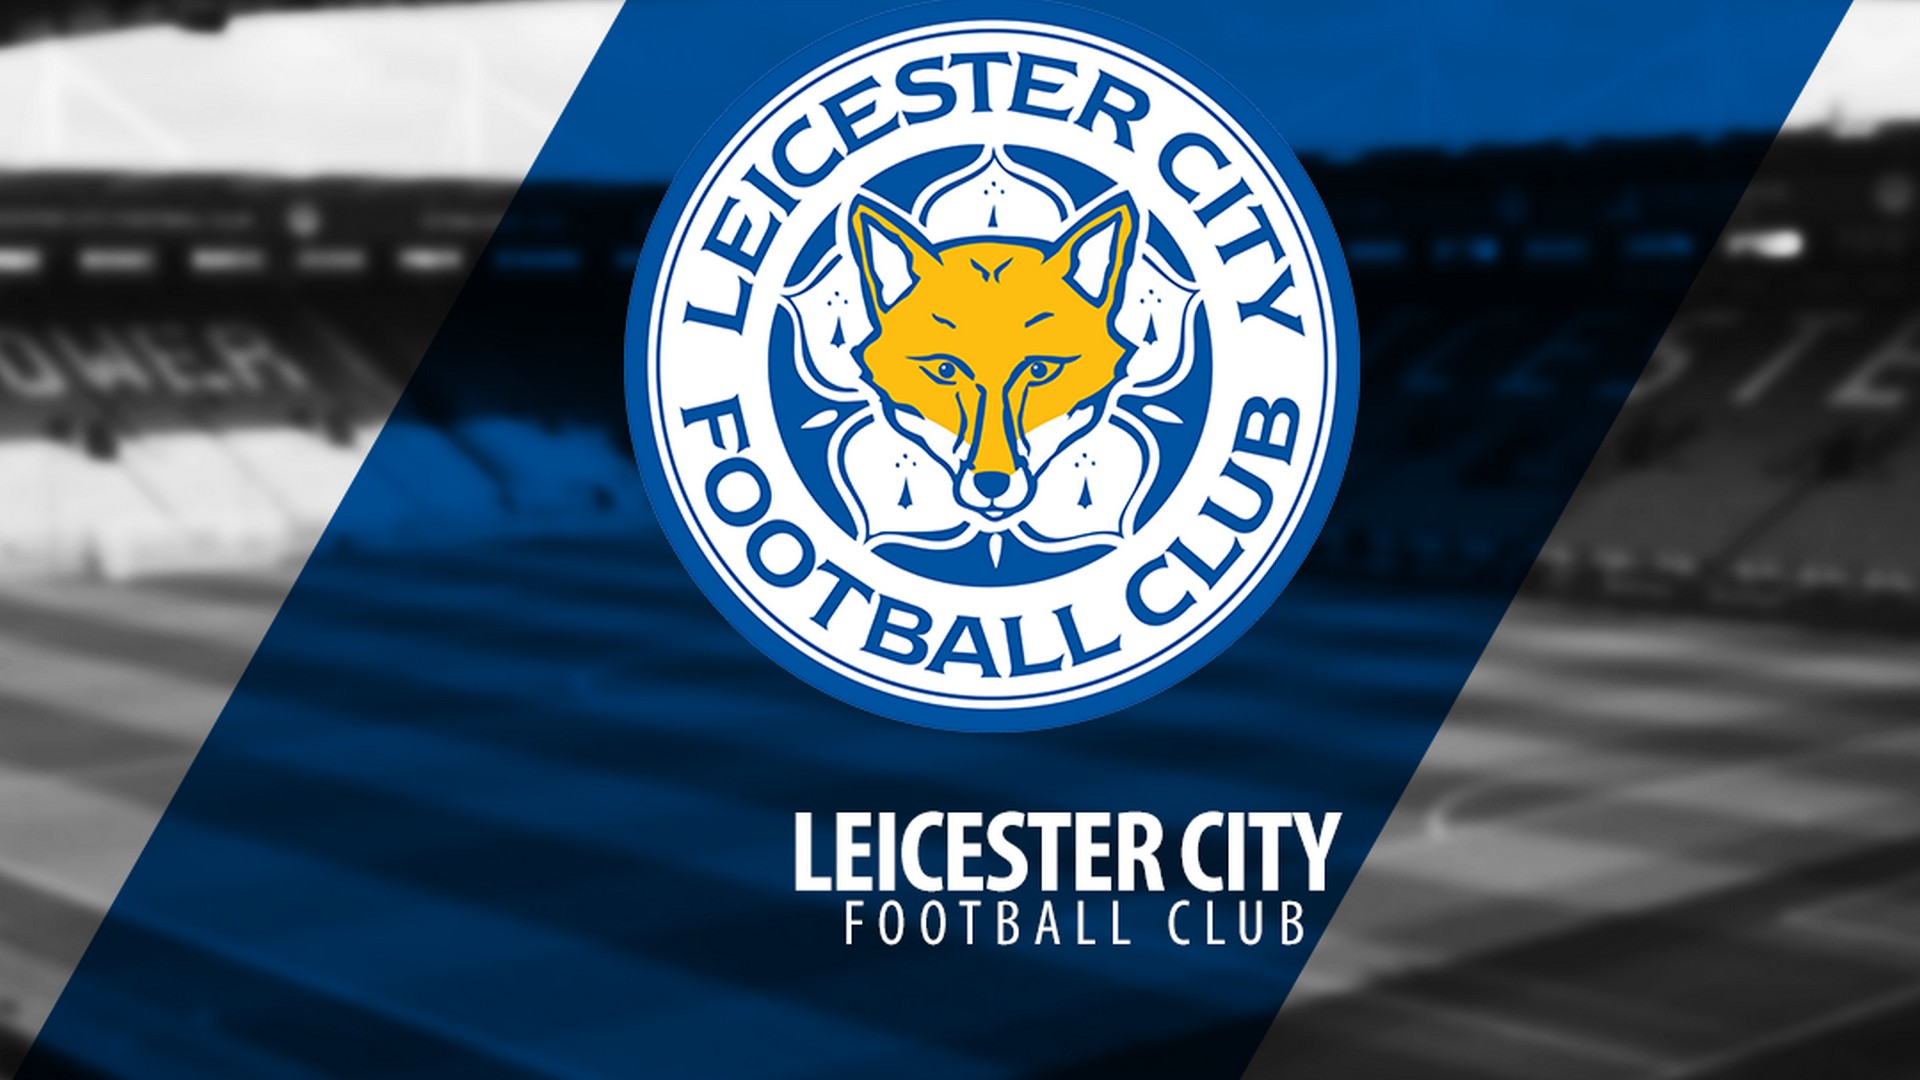 Leicester City HD Wallpapers With high-resolution 1920X1080 pixel. You can use this wallpaper for your Desktop Computers, Mac Screensavers, Windows Backgrounds, iPhone Wallpapers, Tablet or Android Lock screen and another Mobile device